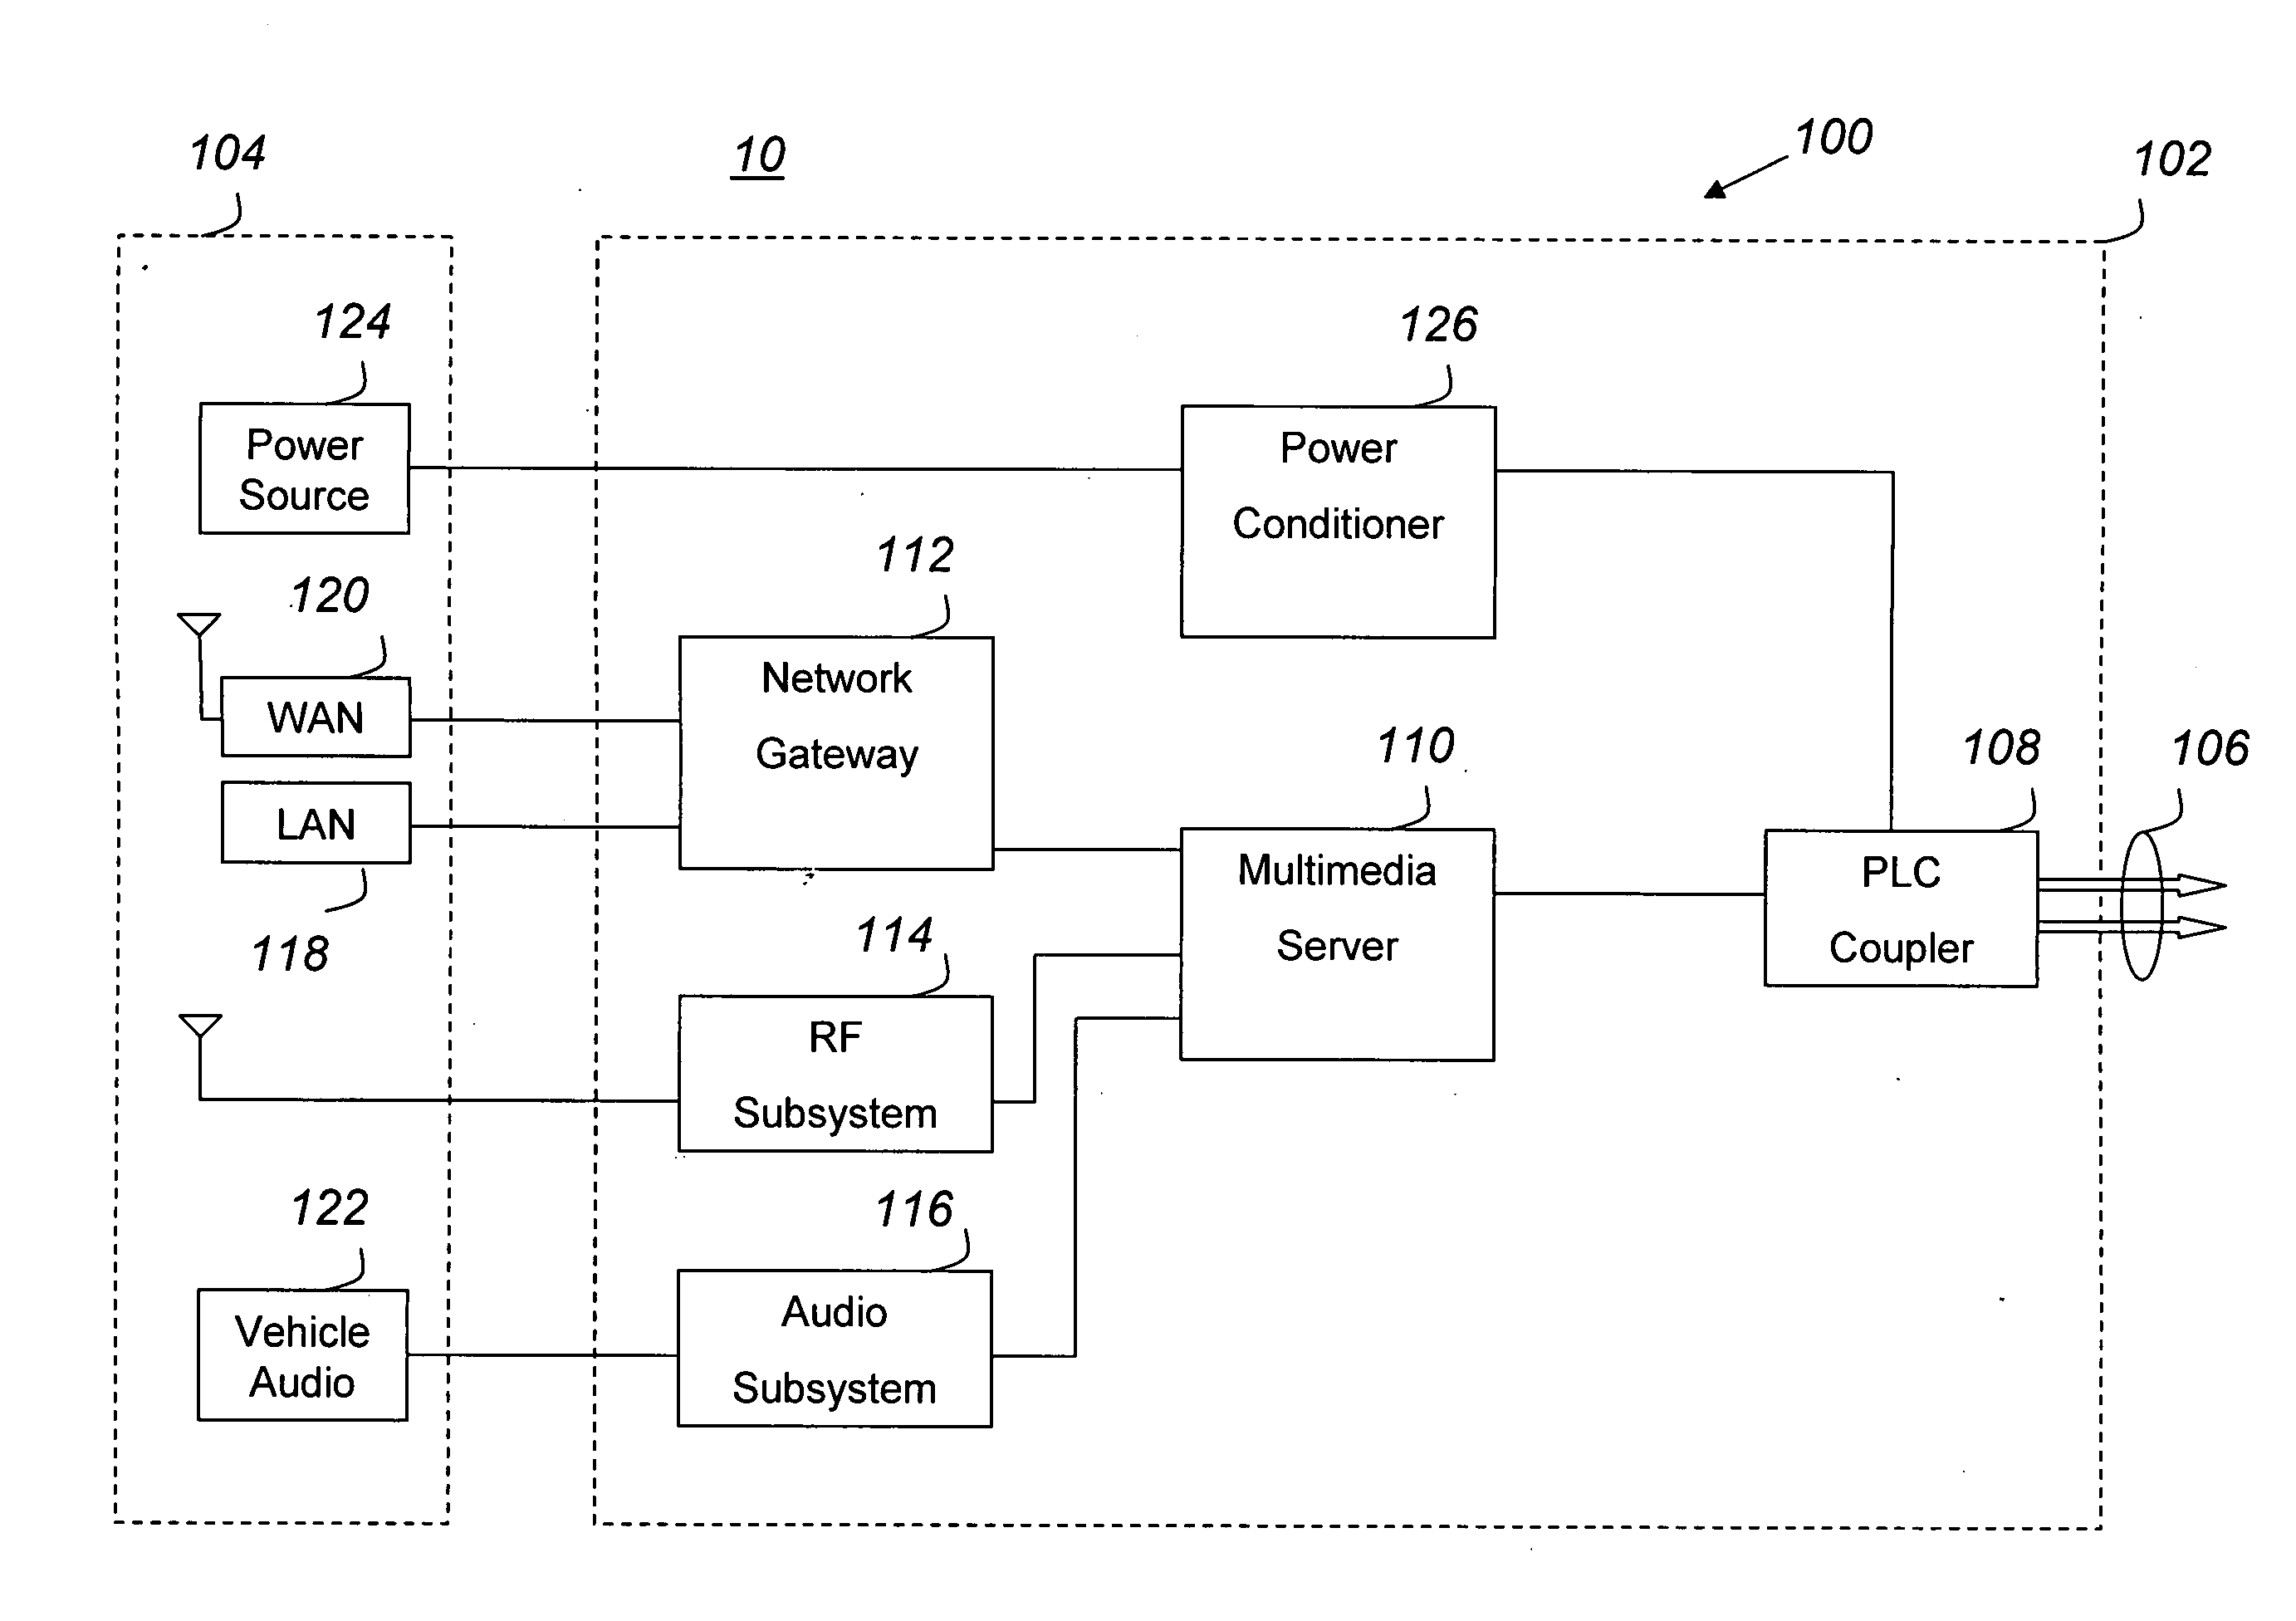 Power line communication system and method